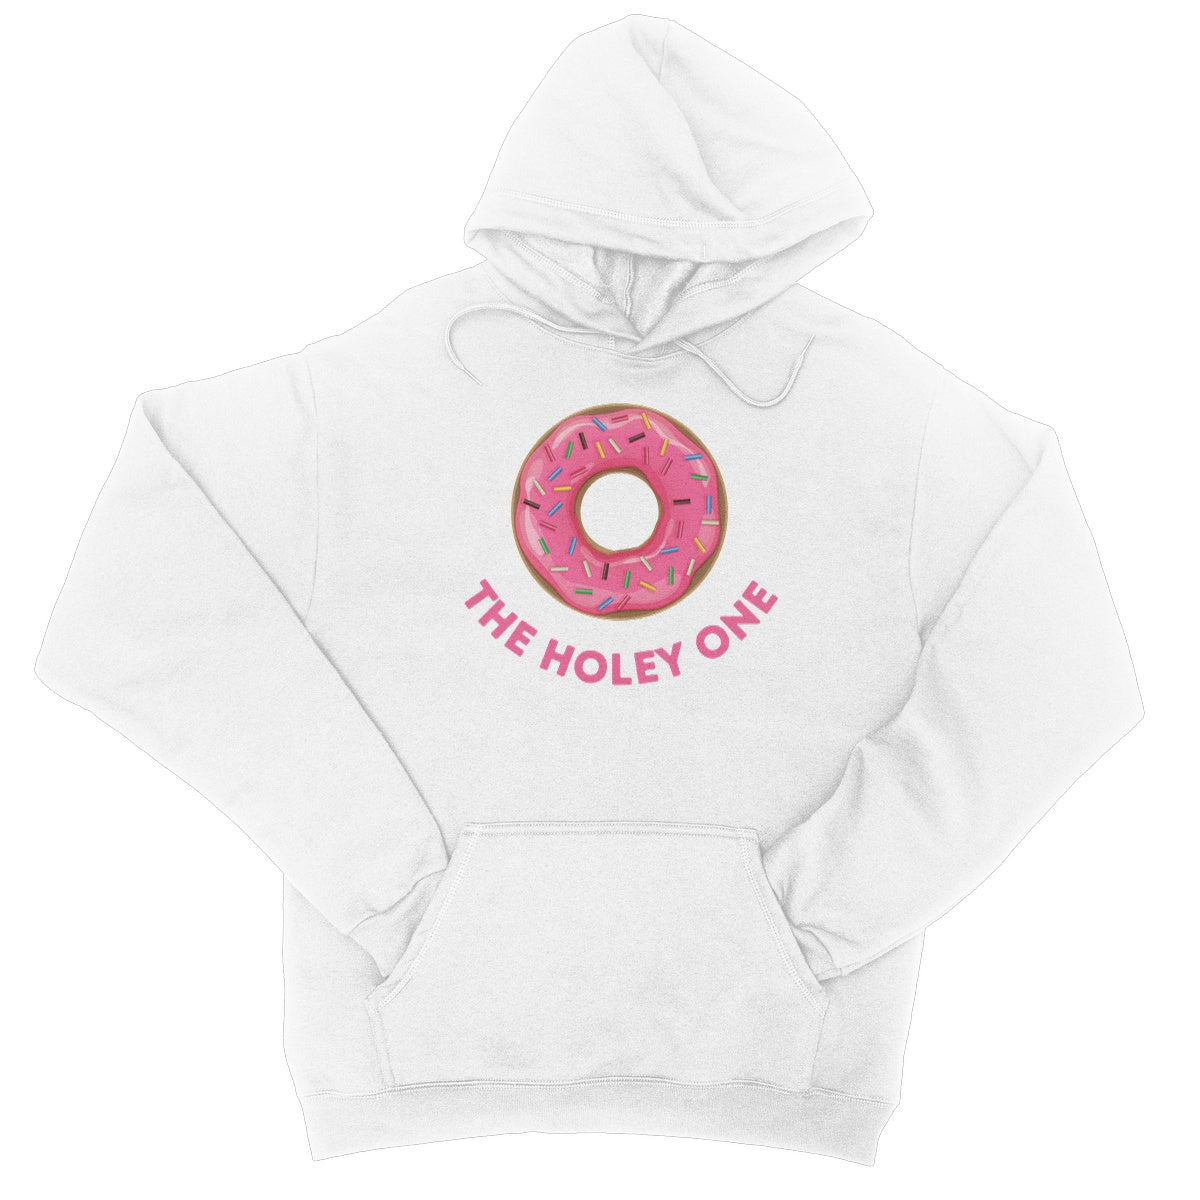 the holey donut hoodie white